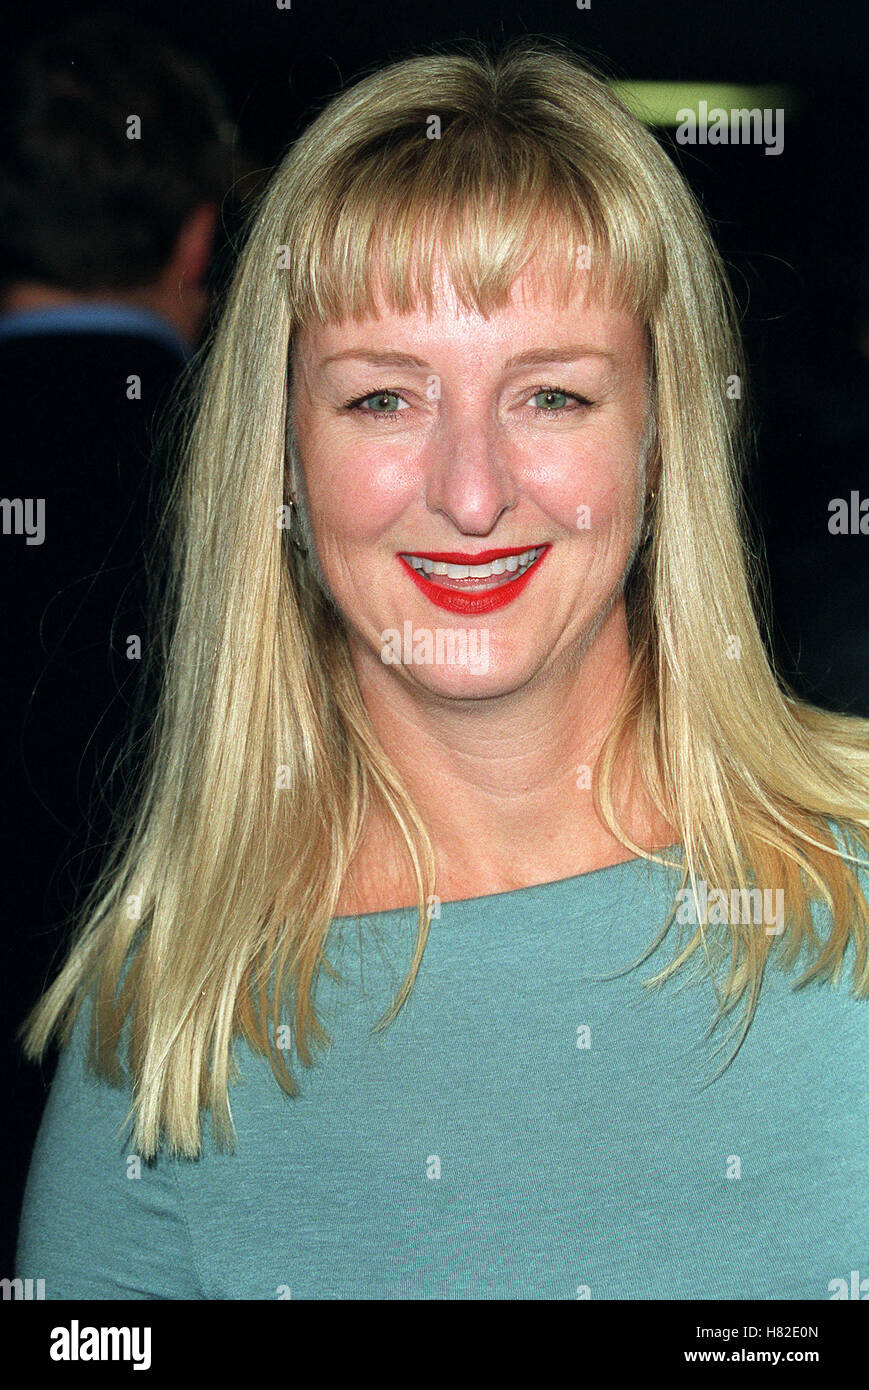 FRANCINE MCDOUGALL SUGAR AND SPICE PREMIERE LOS ANGELES LOS ANGELES USA 24 January 2001 Stock Photo